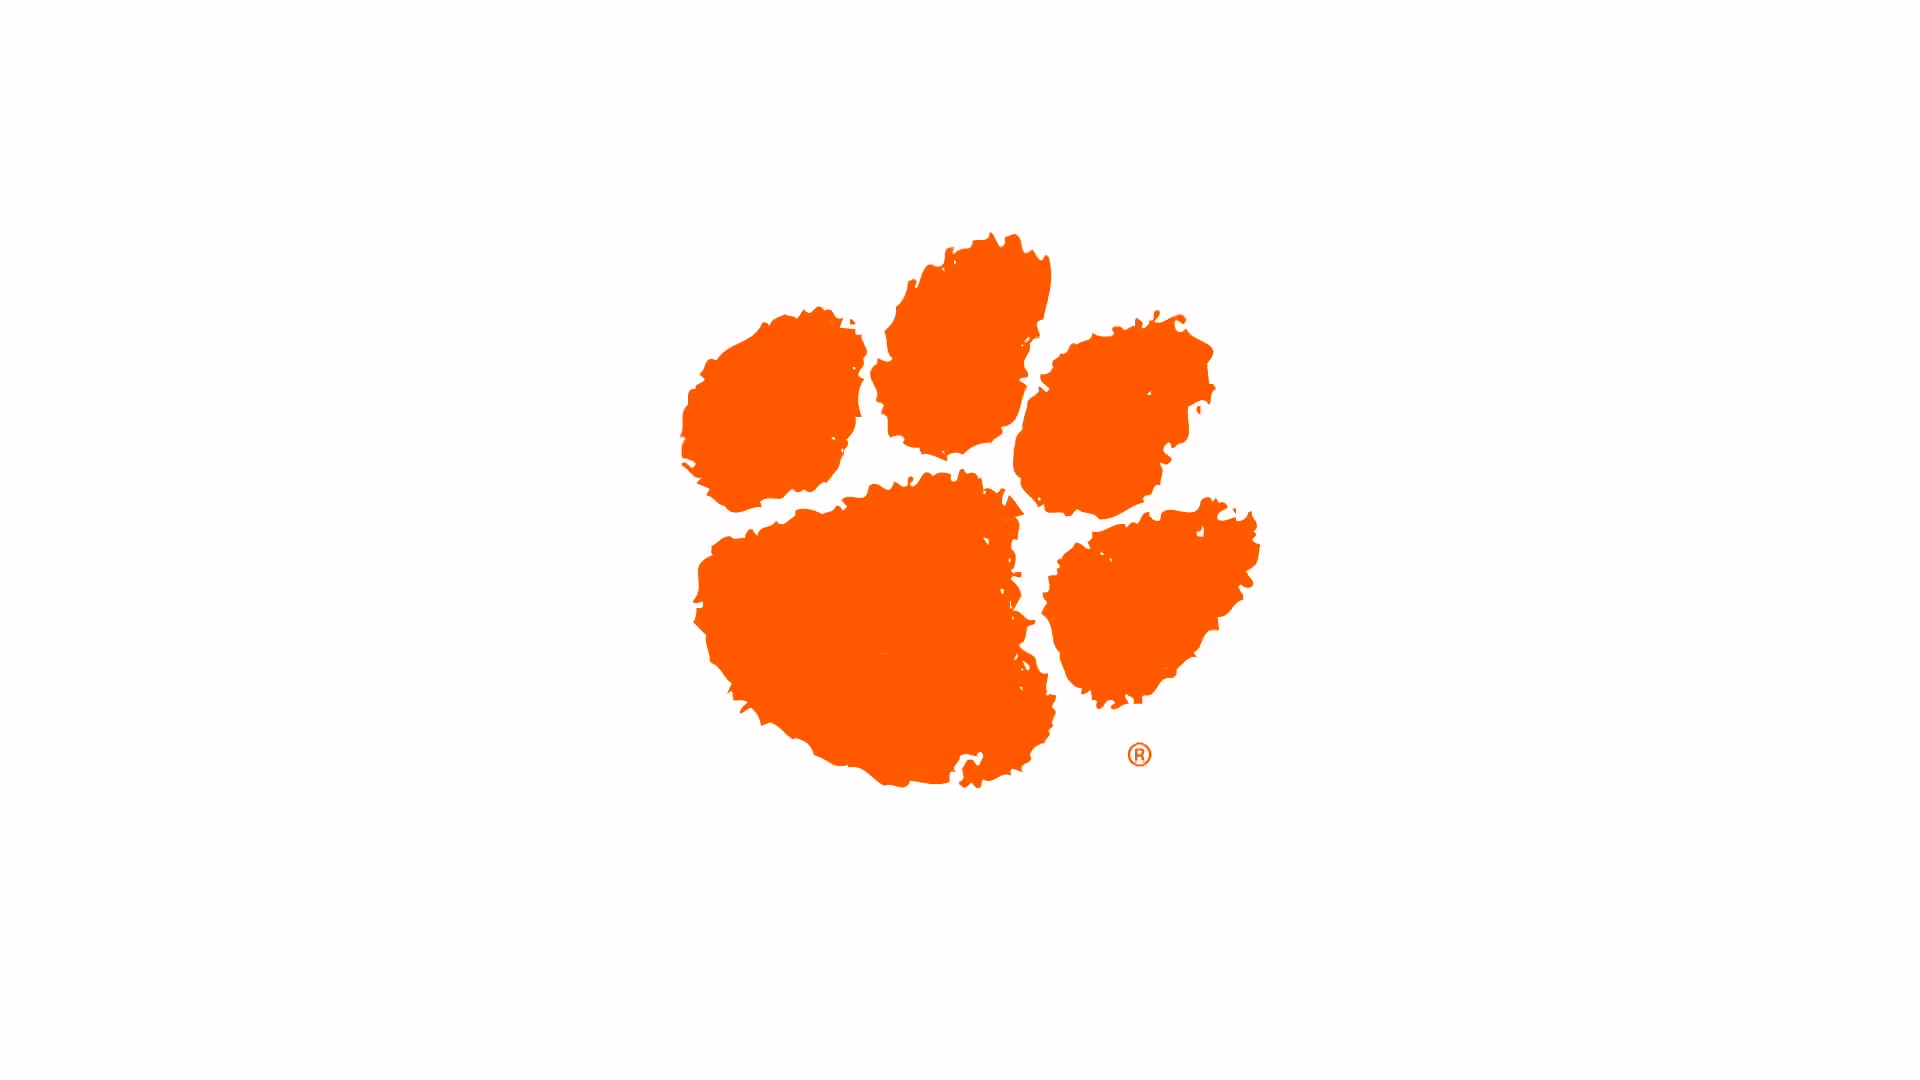 Clemson Football: Top 6 Reasons Tigers Are #1